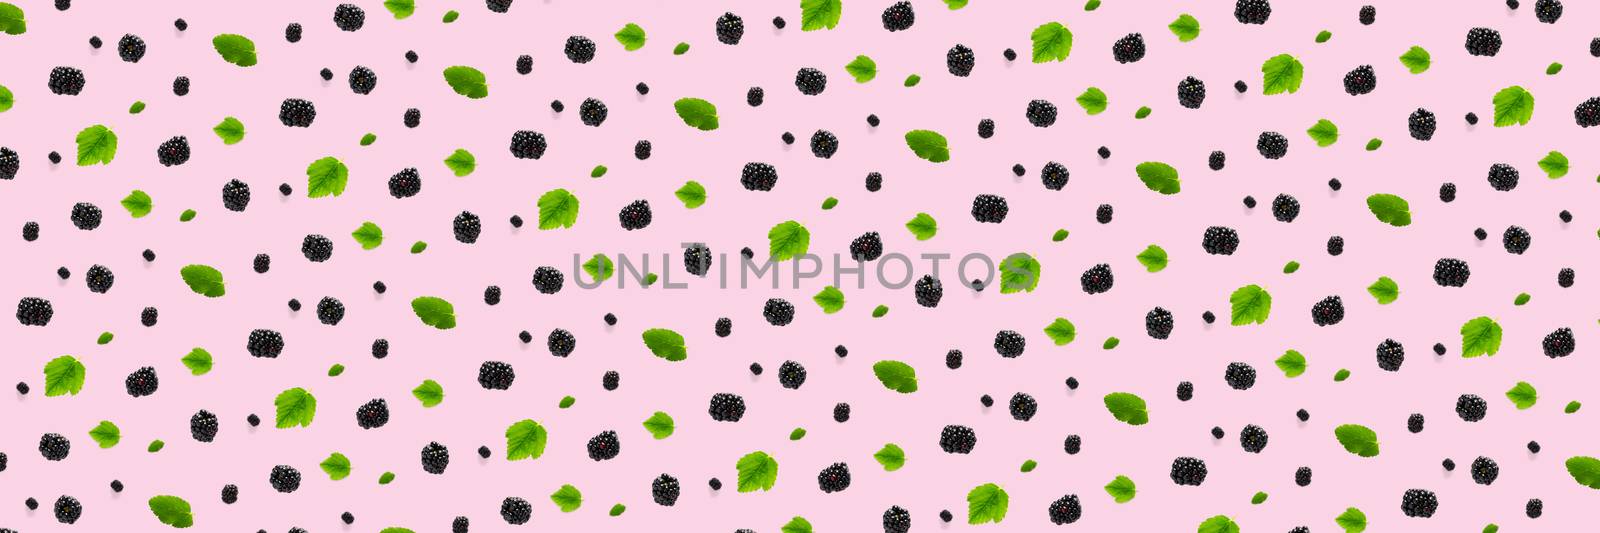 Background from isolated brambles. Group of tasty ripe blackberry isolated on pink background. modern backround of falling blackberry or bramble. by PhotoTime